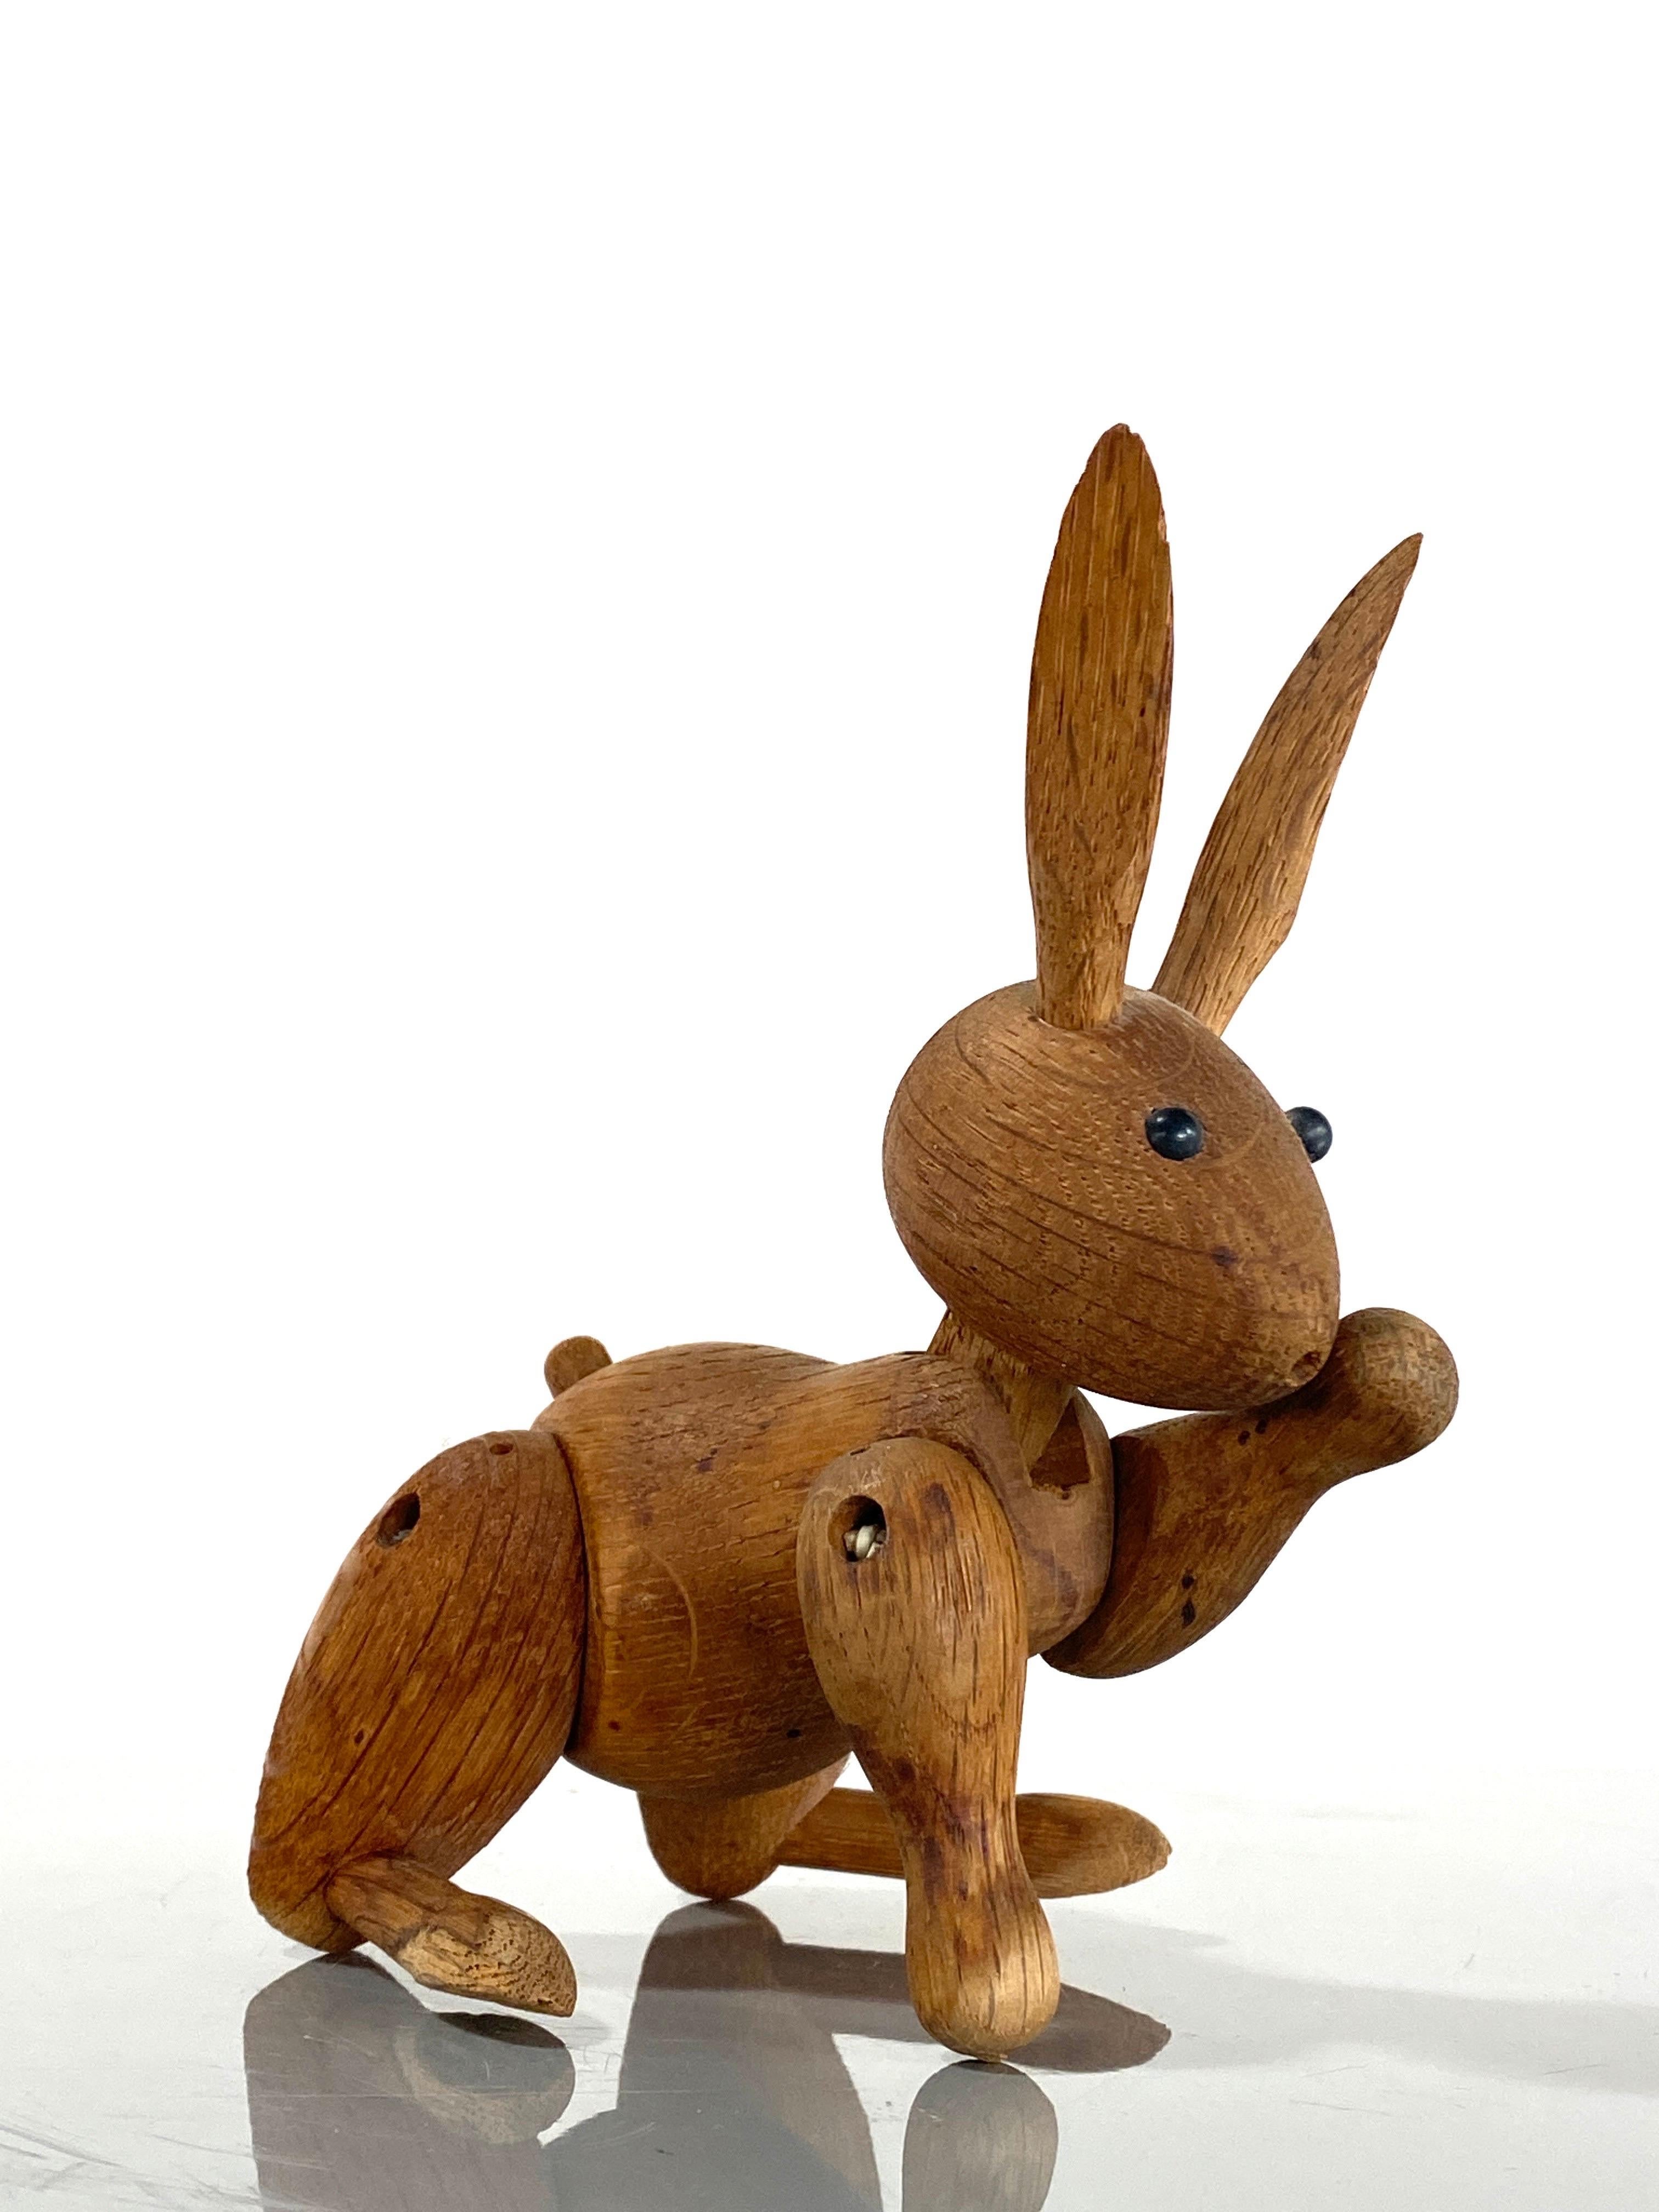 This rabbit was designed by Kay Bojesen in 1957. This is a copy from the 1960s. It has movable limbs and an adjustable head. It is made of Danish oak that has patinated beautifully over the years. Very nice condition with very little signs of use.